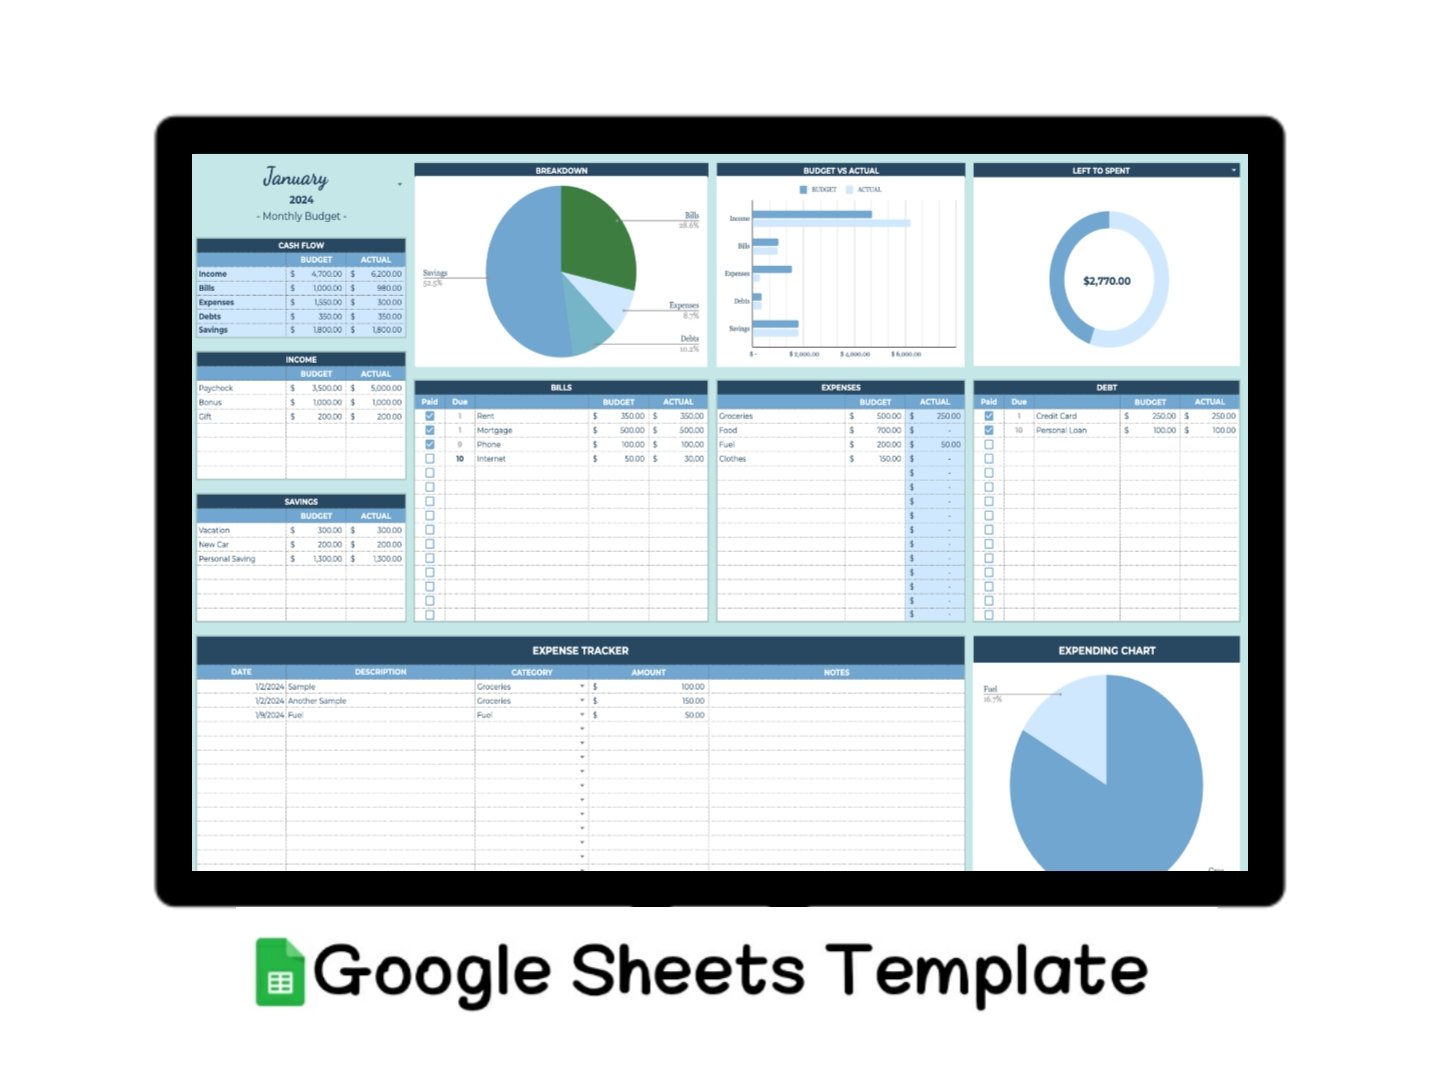 Monthly Budget Google Sheets Template